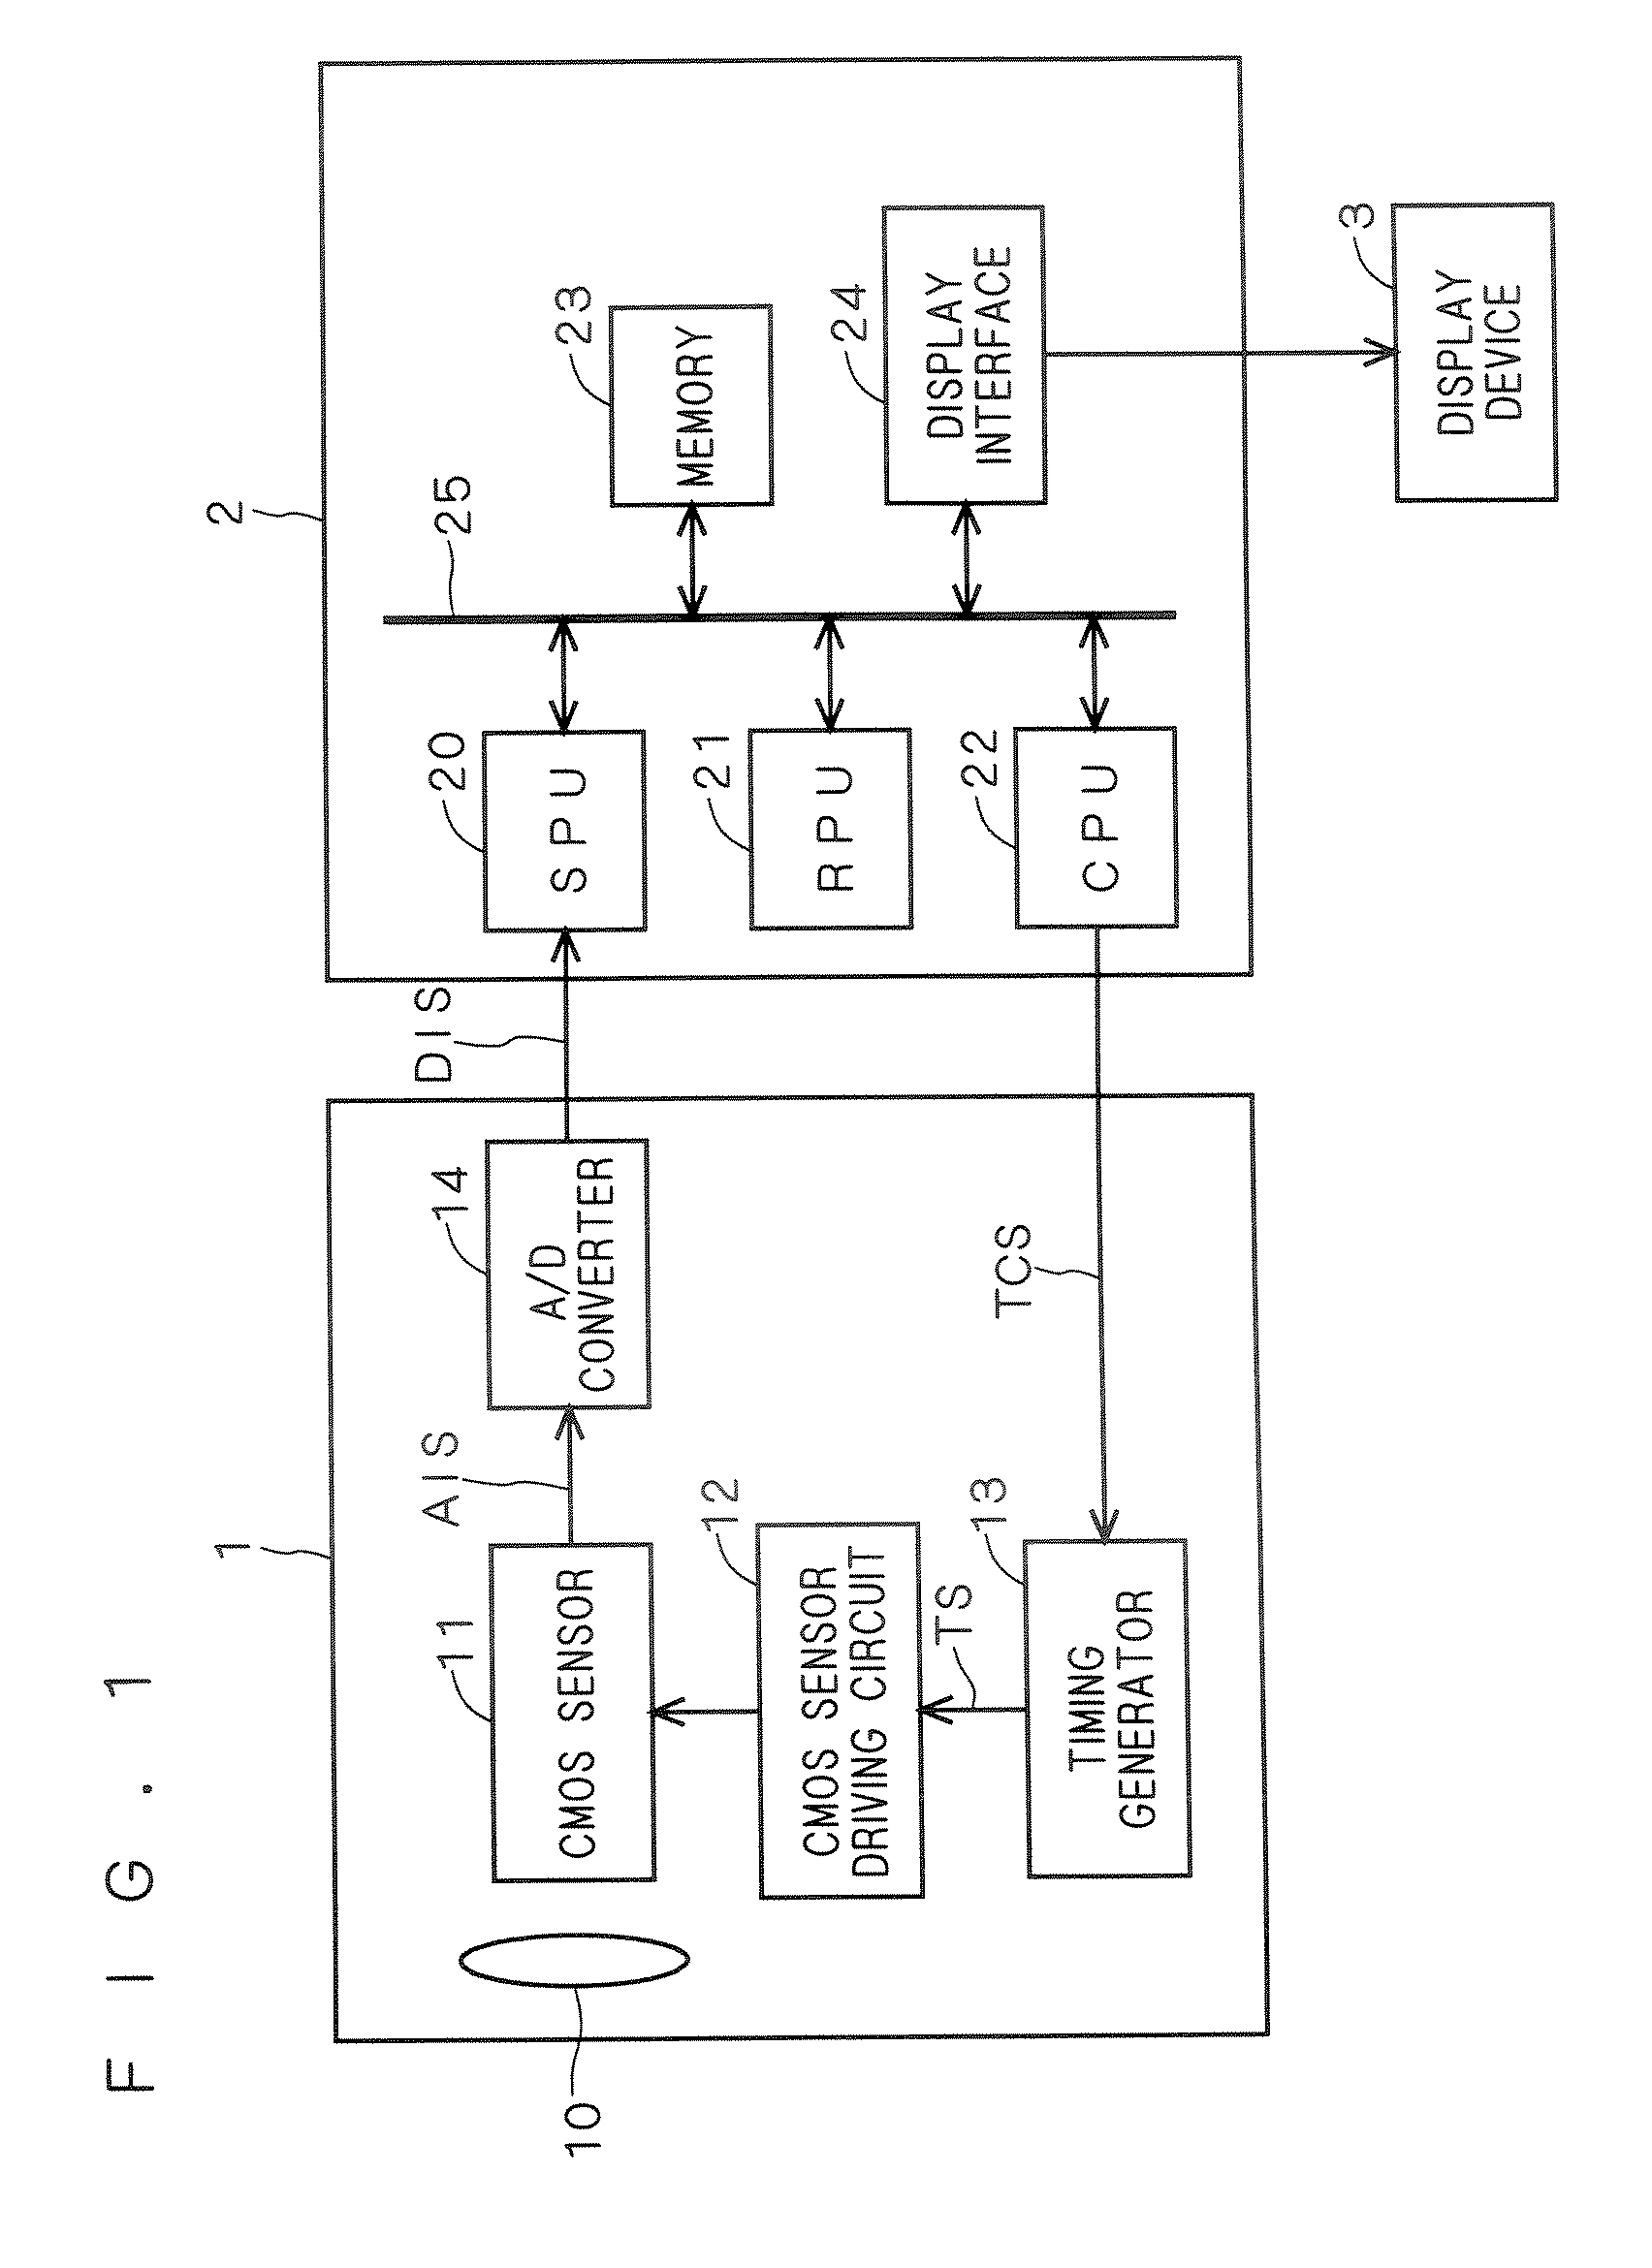 Image processor and camera system for correcting image distortion